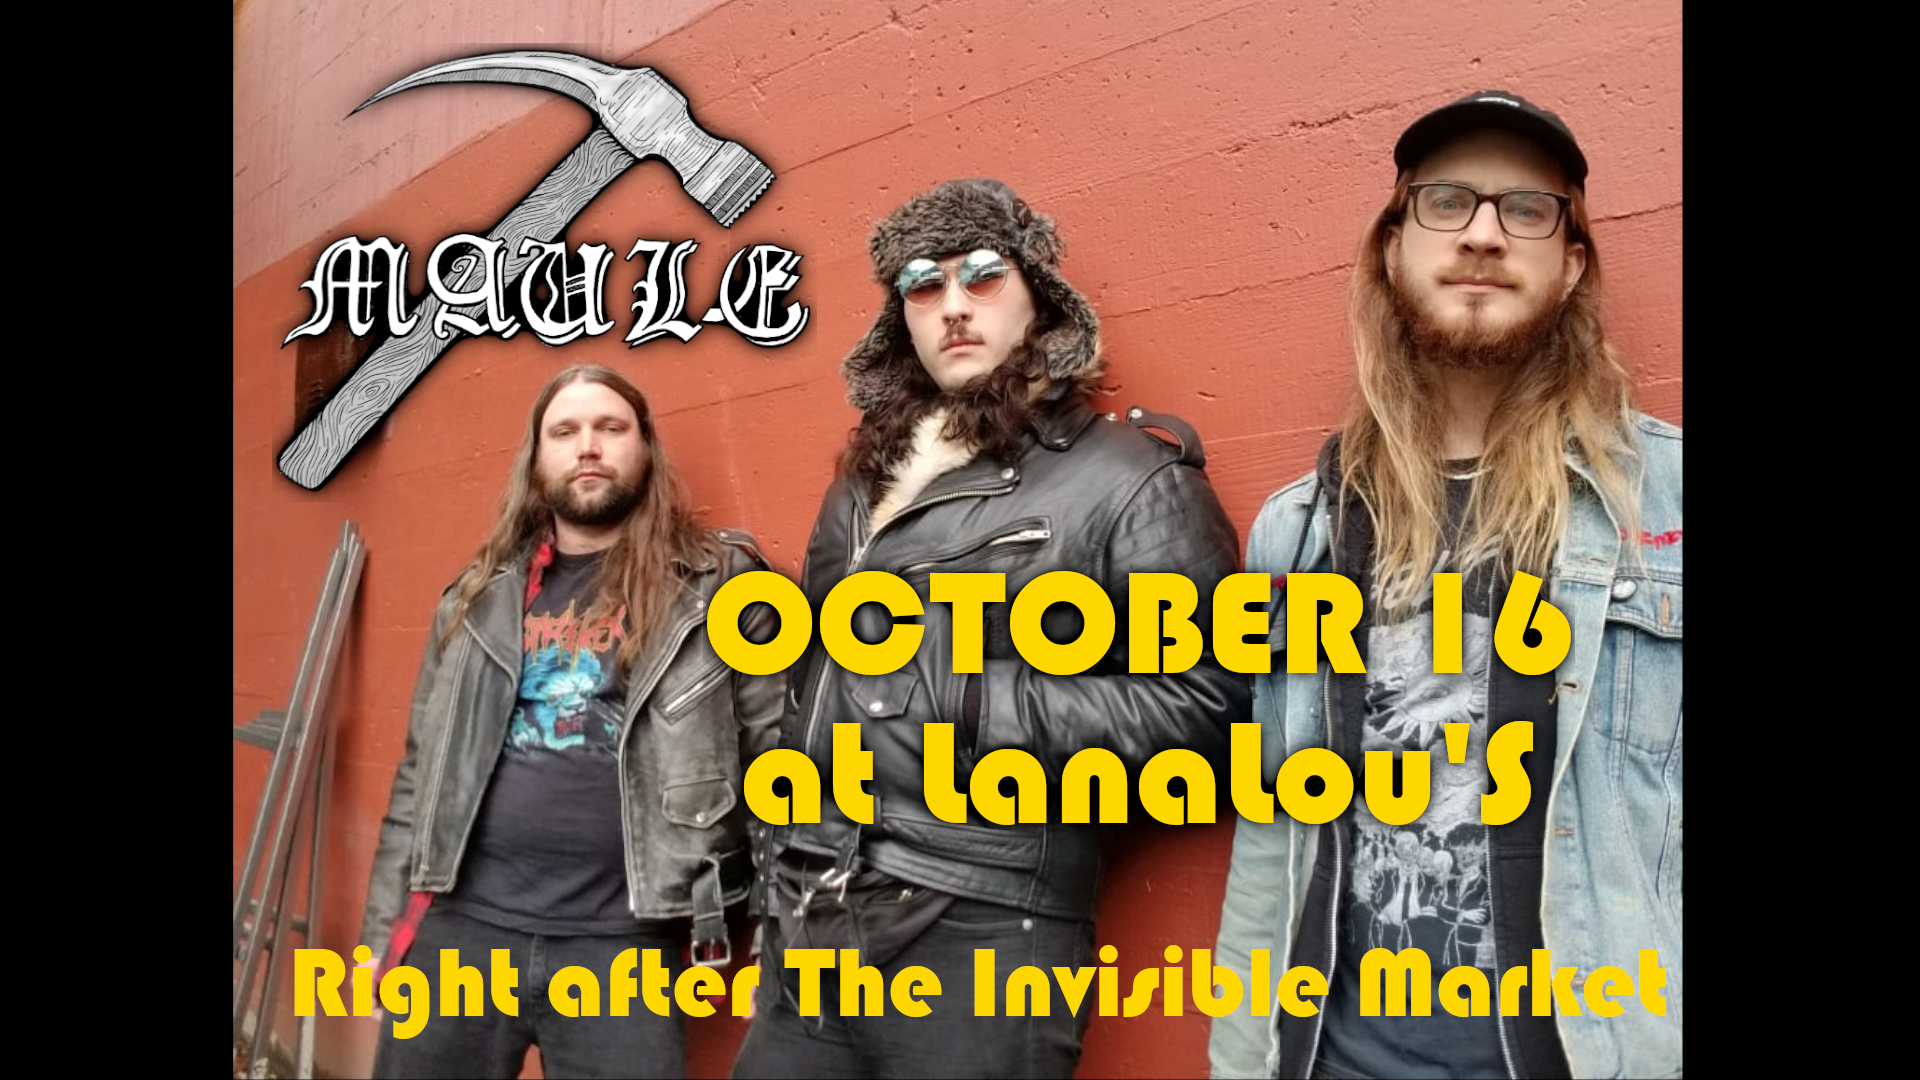 After Market Metal Show: MAULE and more! October 16 at LanaLou's